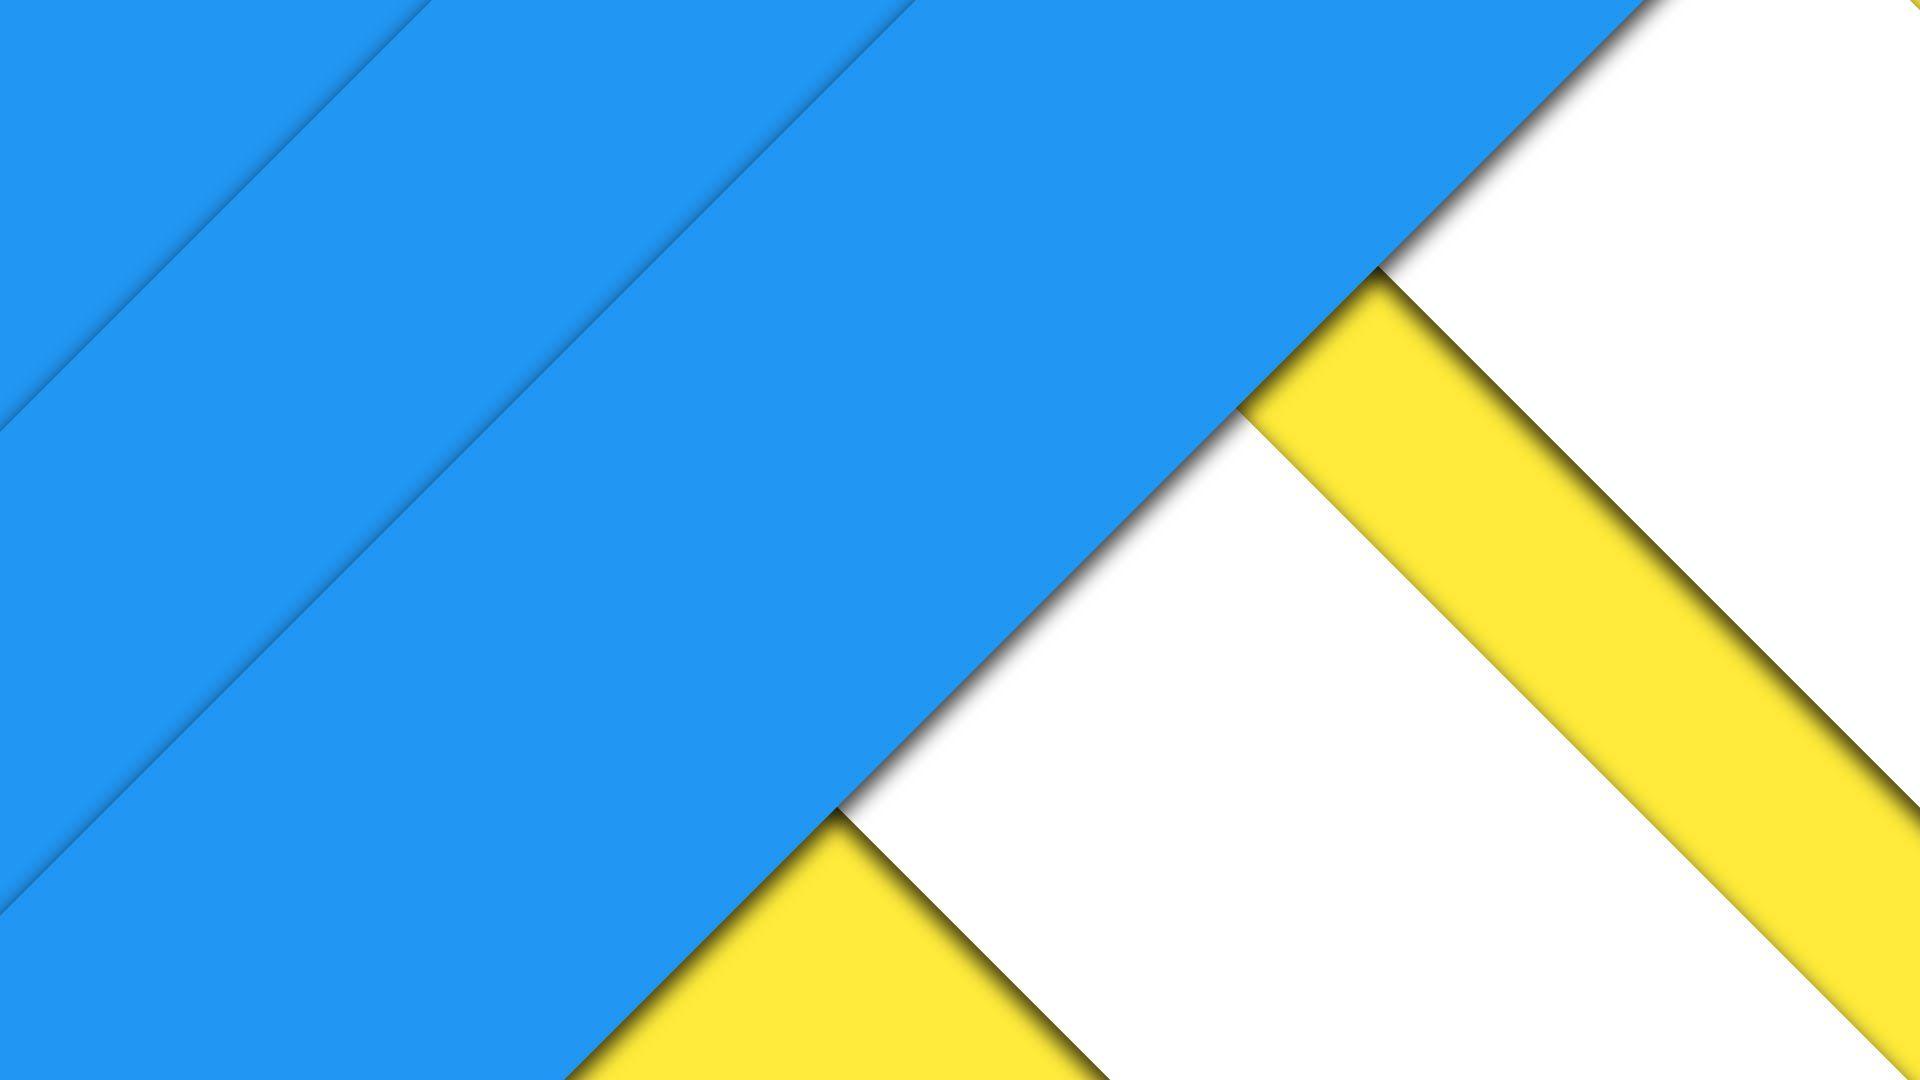 How To Create A Material Design Wallpapers